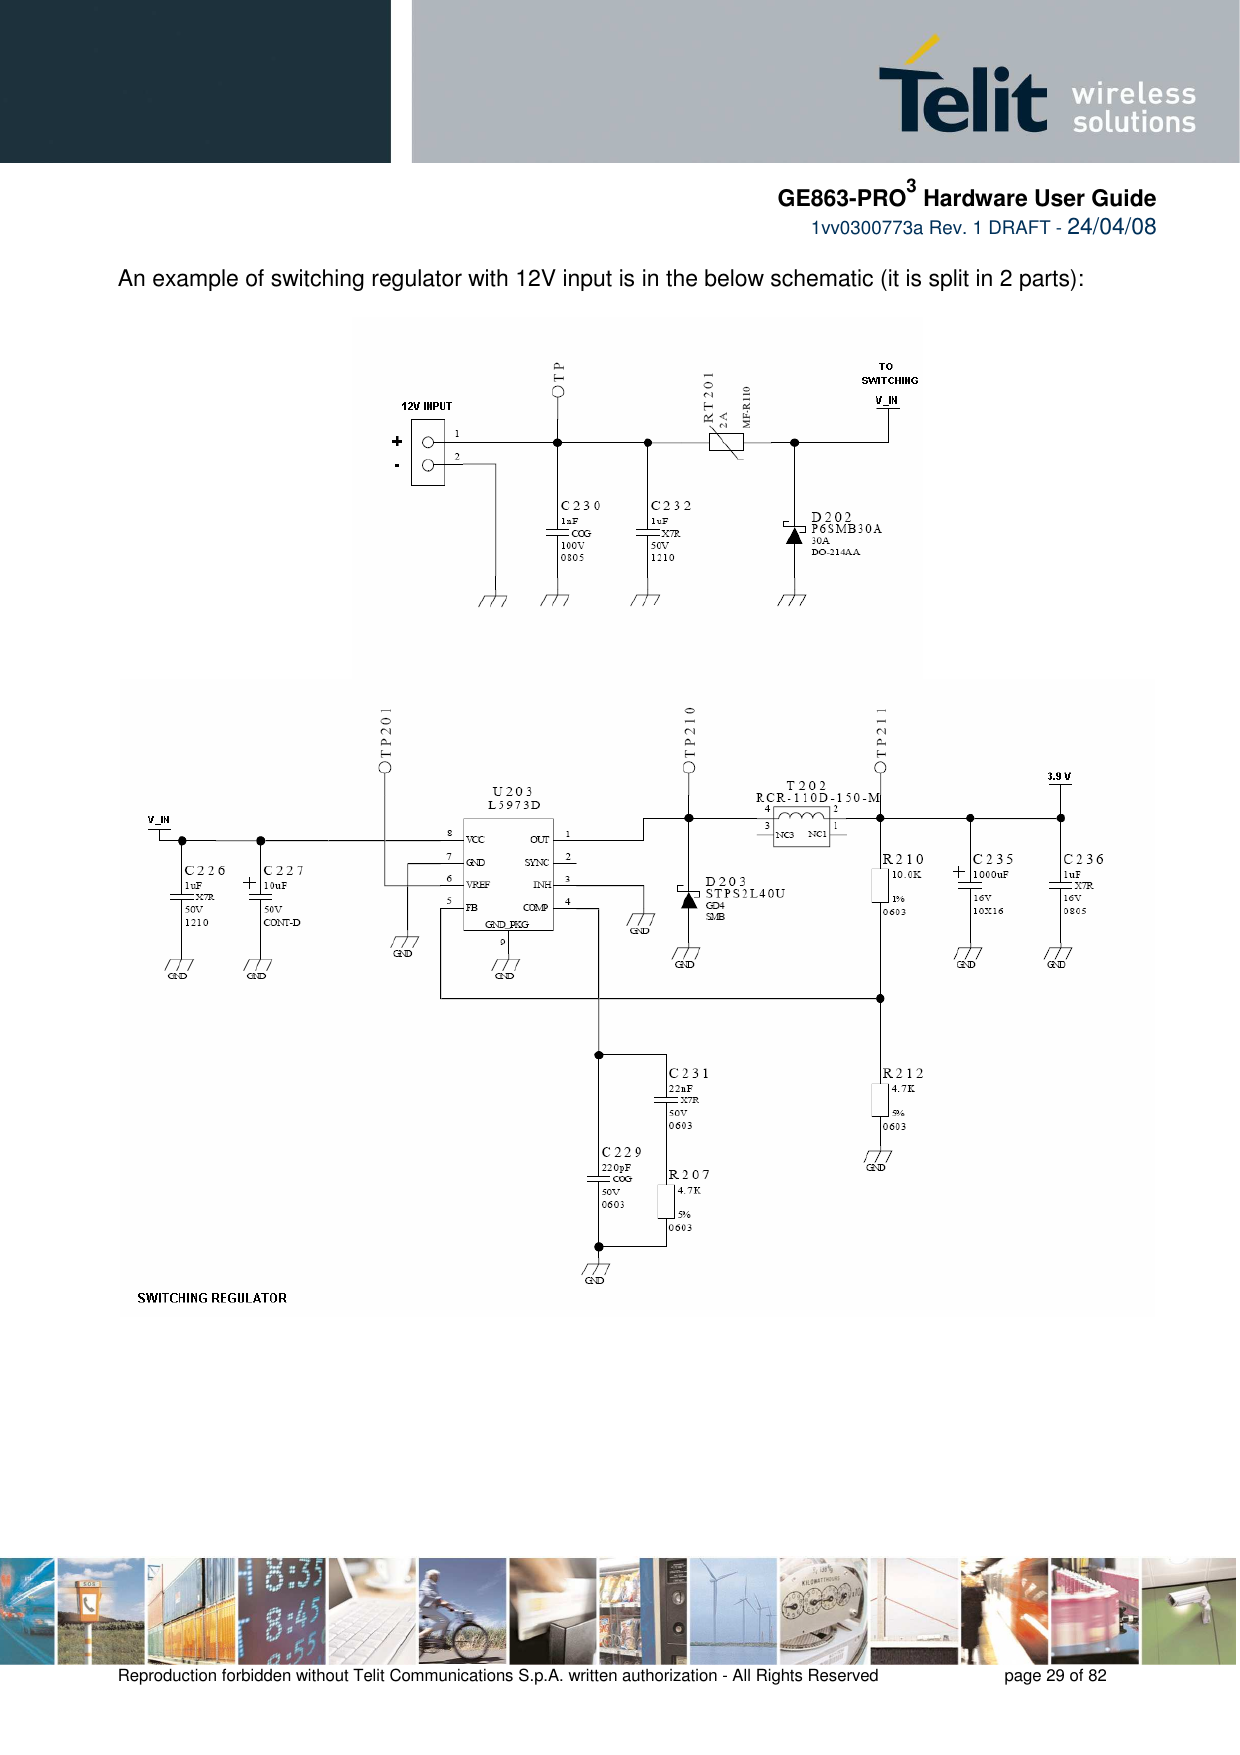     GE863-PRO3 Hardware User Guide  1vv0300773a Rev. 1 DRAFT - 24/04/08    Reproduction forbidden without Telit Communications S.p.A. written authorization - All Rights Reserved    page 29 of 82   An example of switching regulator with 12V input is in the below schematic (it is split in 2 parts):            